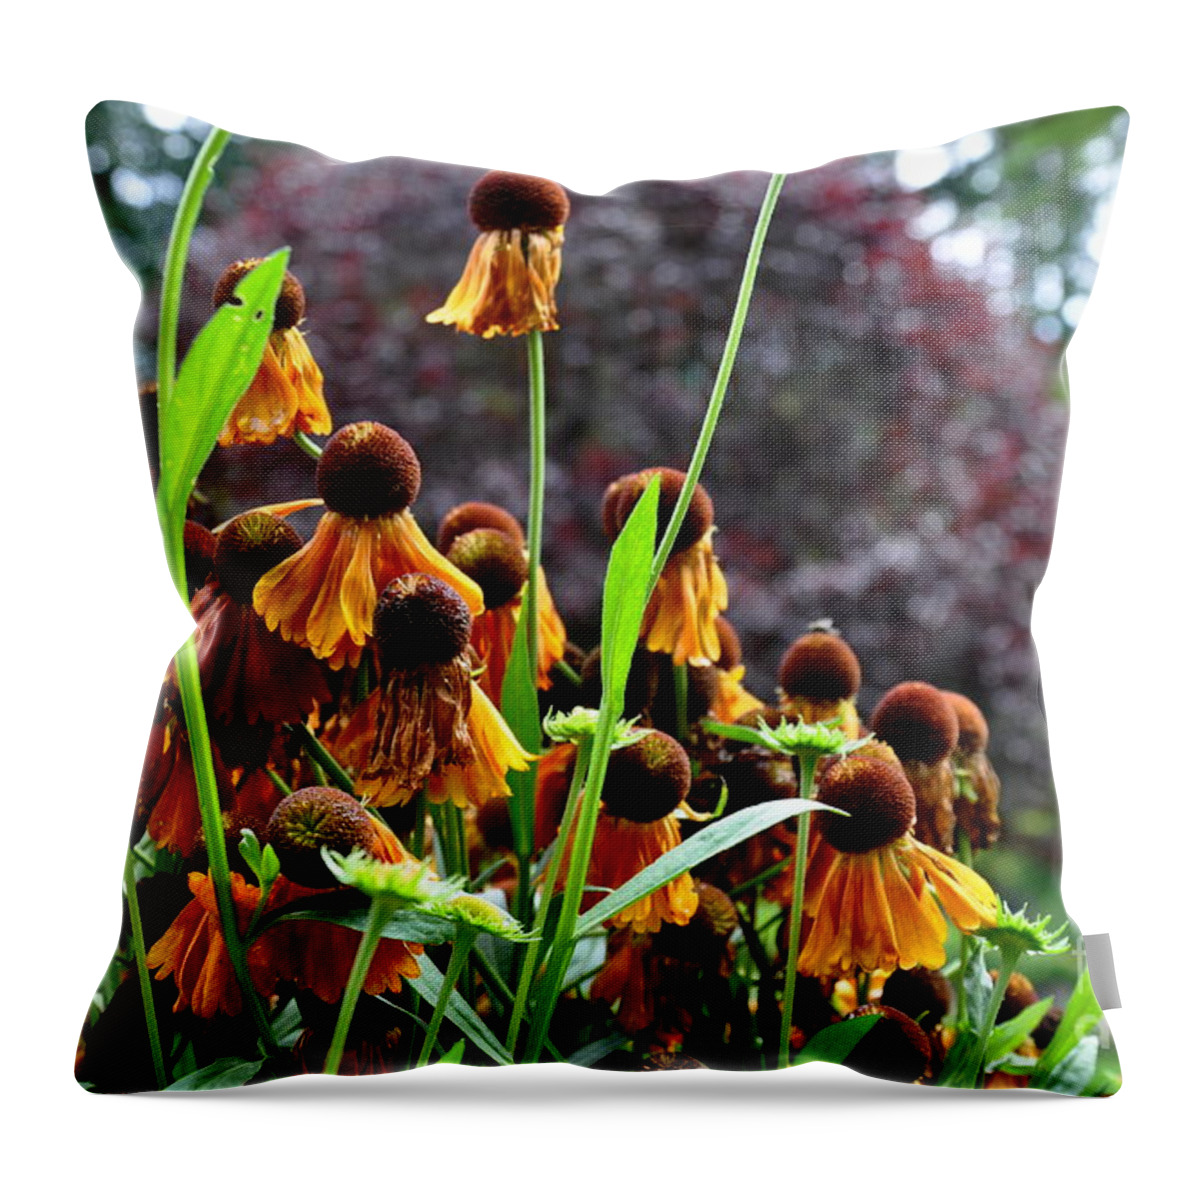  Butchart Gardens Throw Pillow featuring the photograph Helenium Sneezeweed by Tatyana Searcy